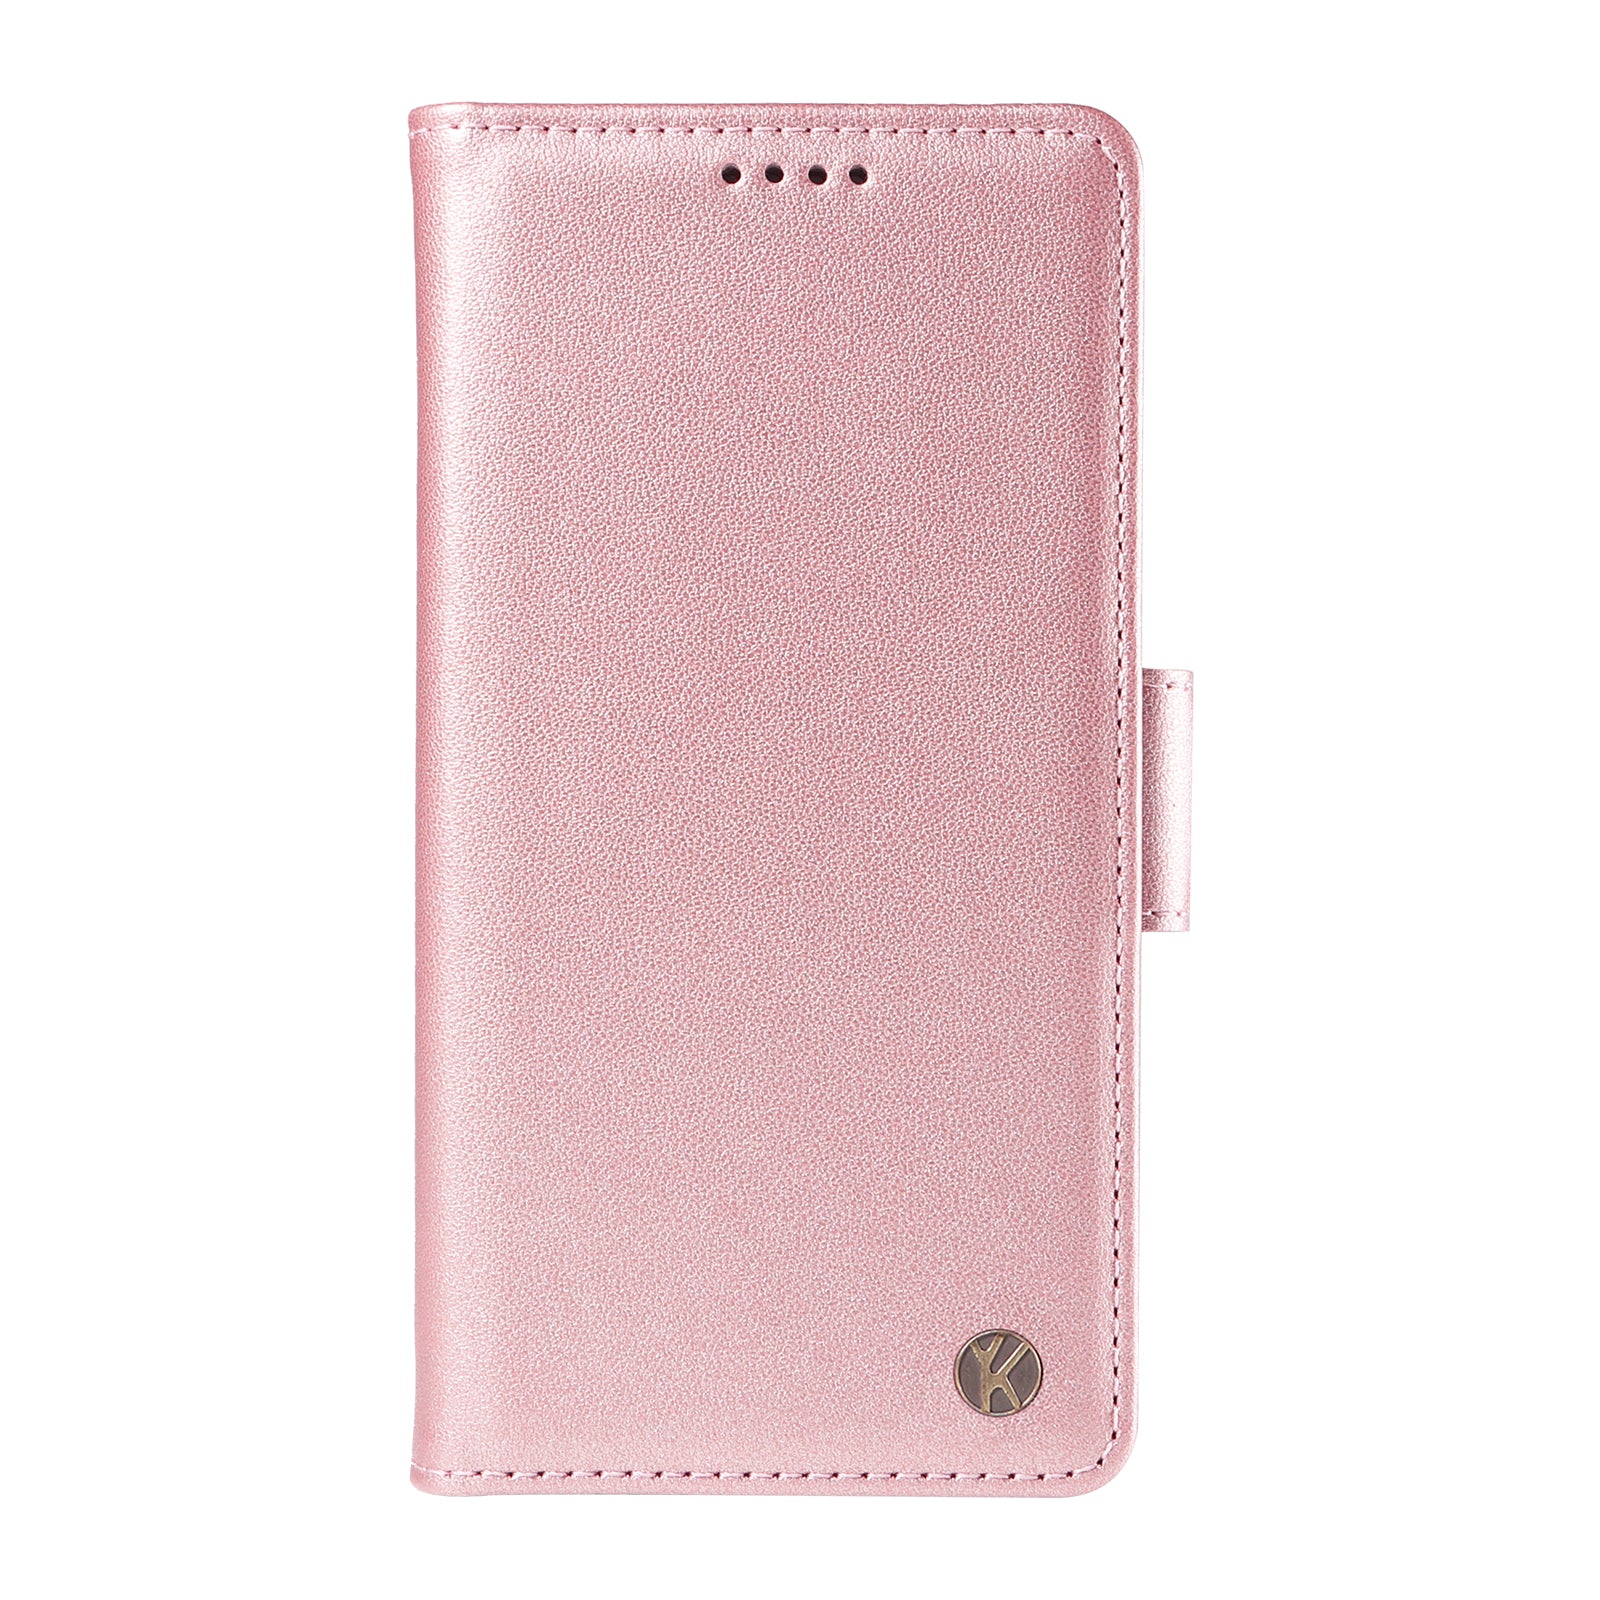 YIKATU YK-003 For Samsung Galaxy S24 Case PU Leather Folio Wallet Phone Cover - Rose Gold